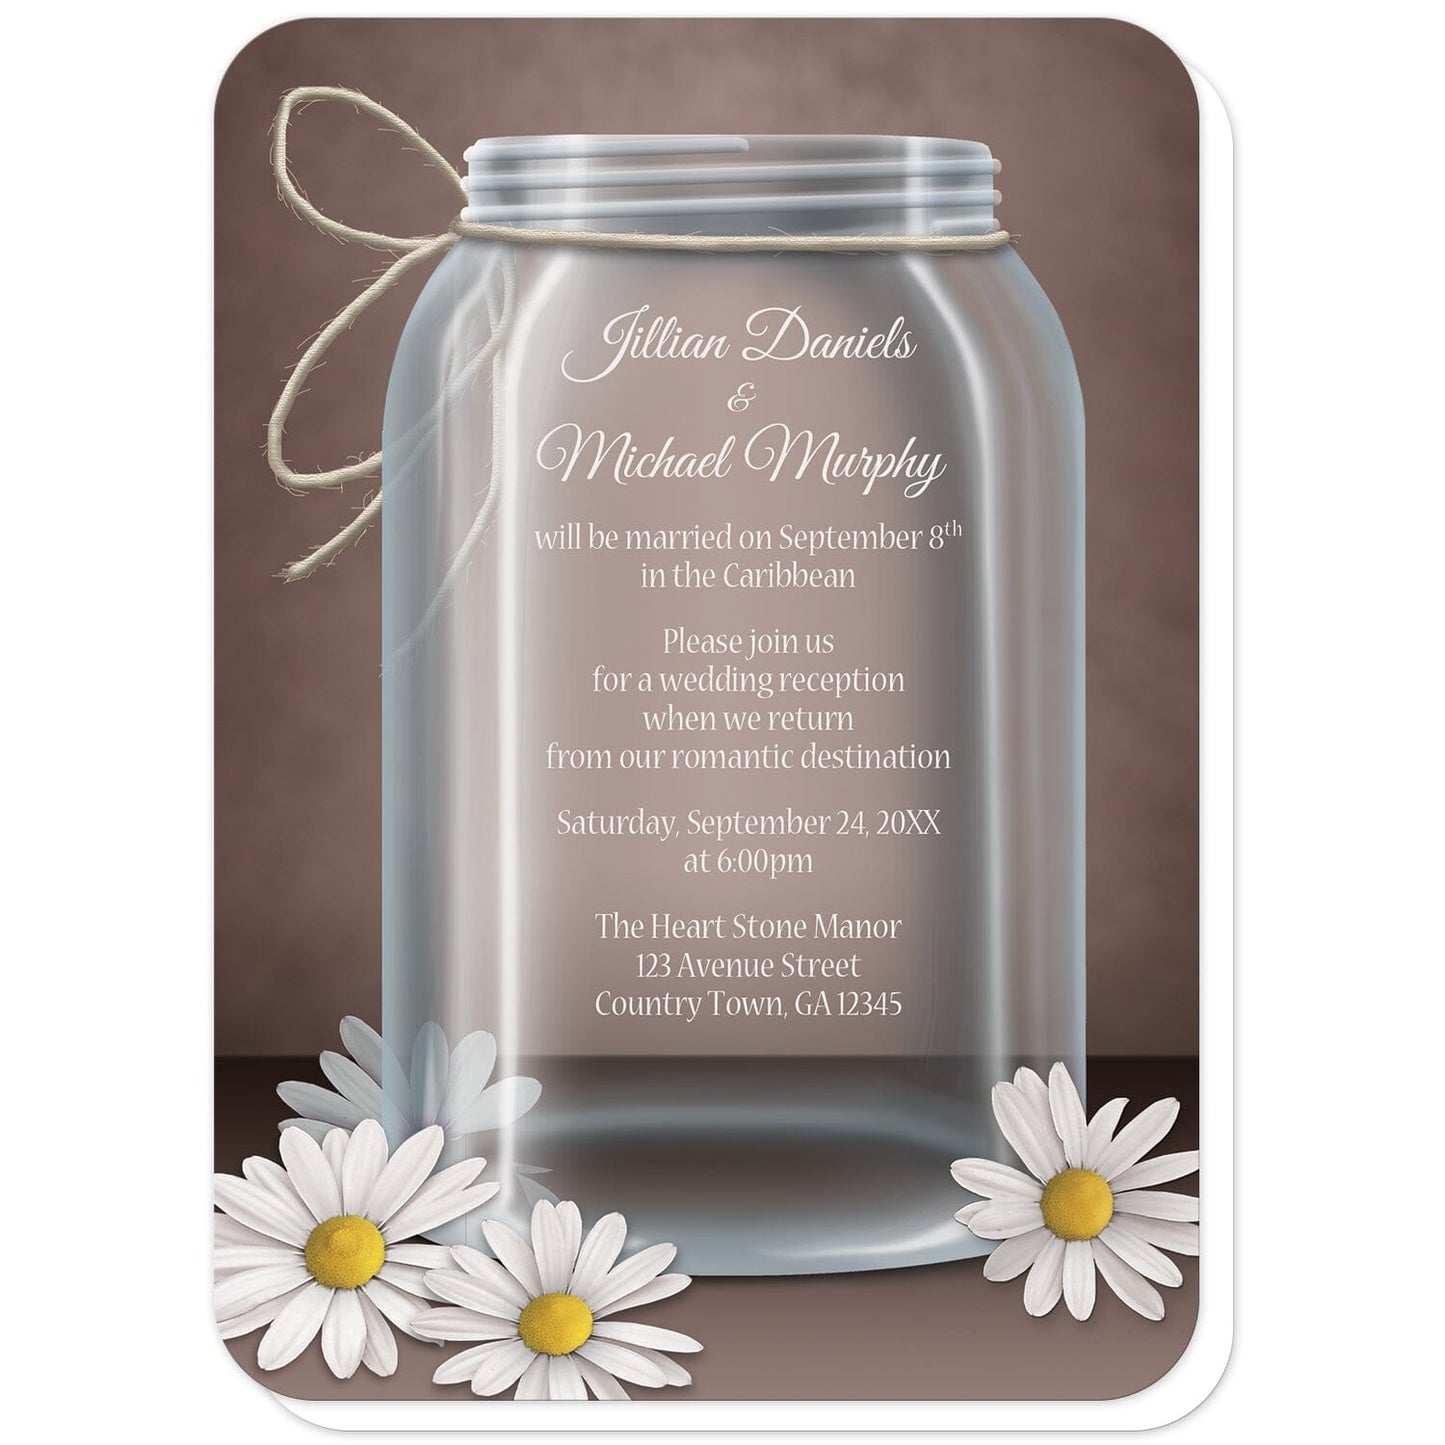 Vintage Rustic Mason Jar Daisy Reception Only Invitations (with rounded corners) at Artistically Invited. Beautiful vintage rustic mason jar daisy reception only invitations with an illustration of a glass mason jar with twine tied around the neck of it, white and yellow daisies laying at the foot of the jar, and a vintage brown background. Your personalized post-wedding reception details are custom printed in white over the mason jar area of the design.